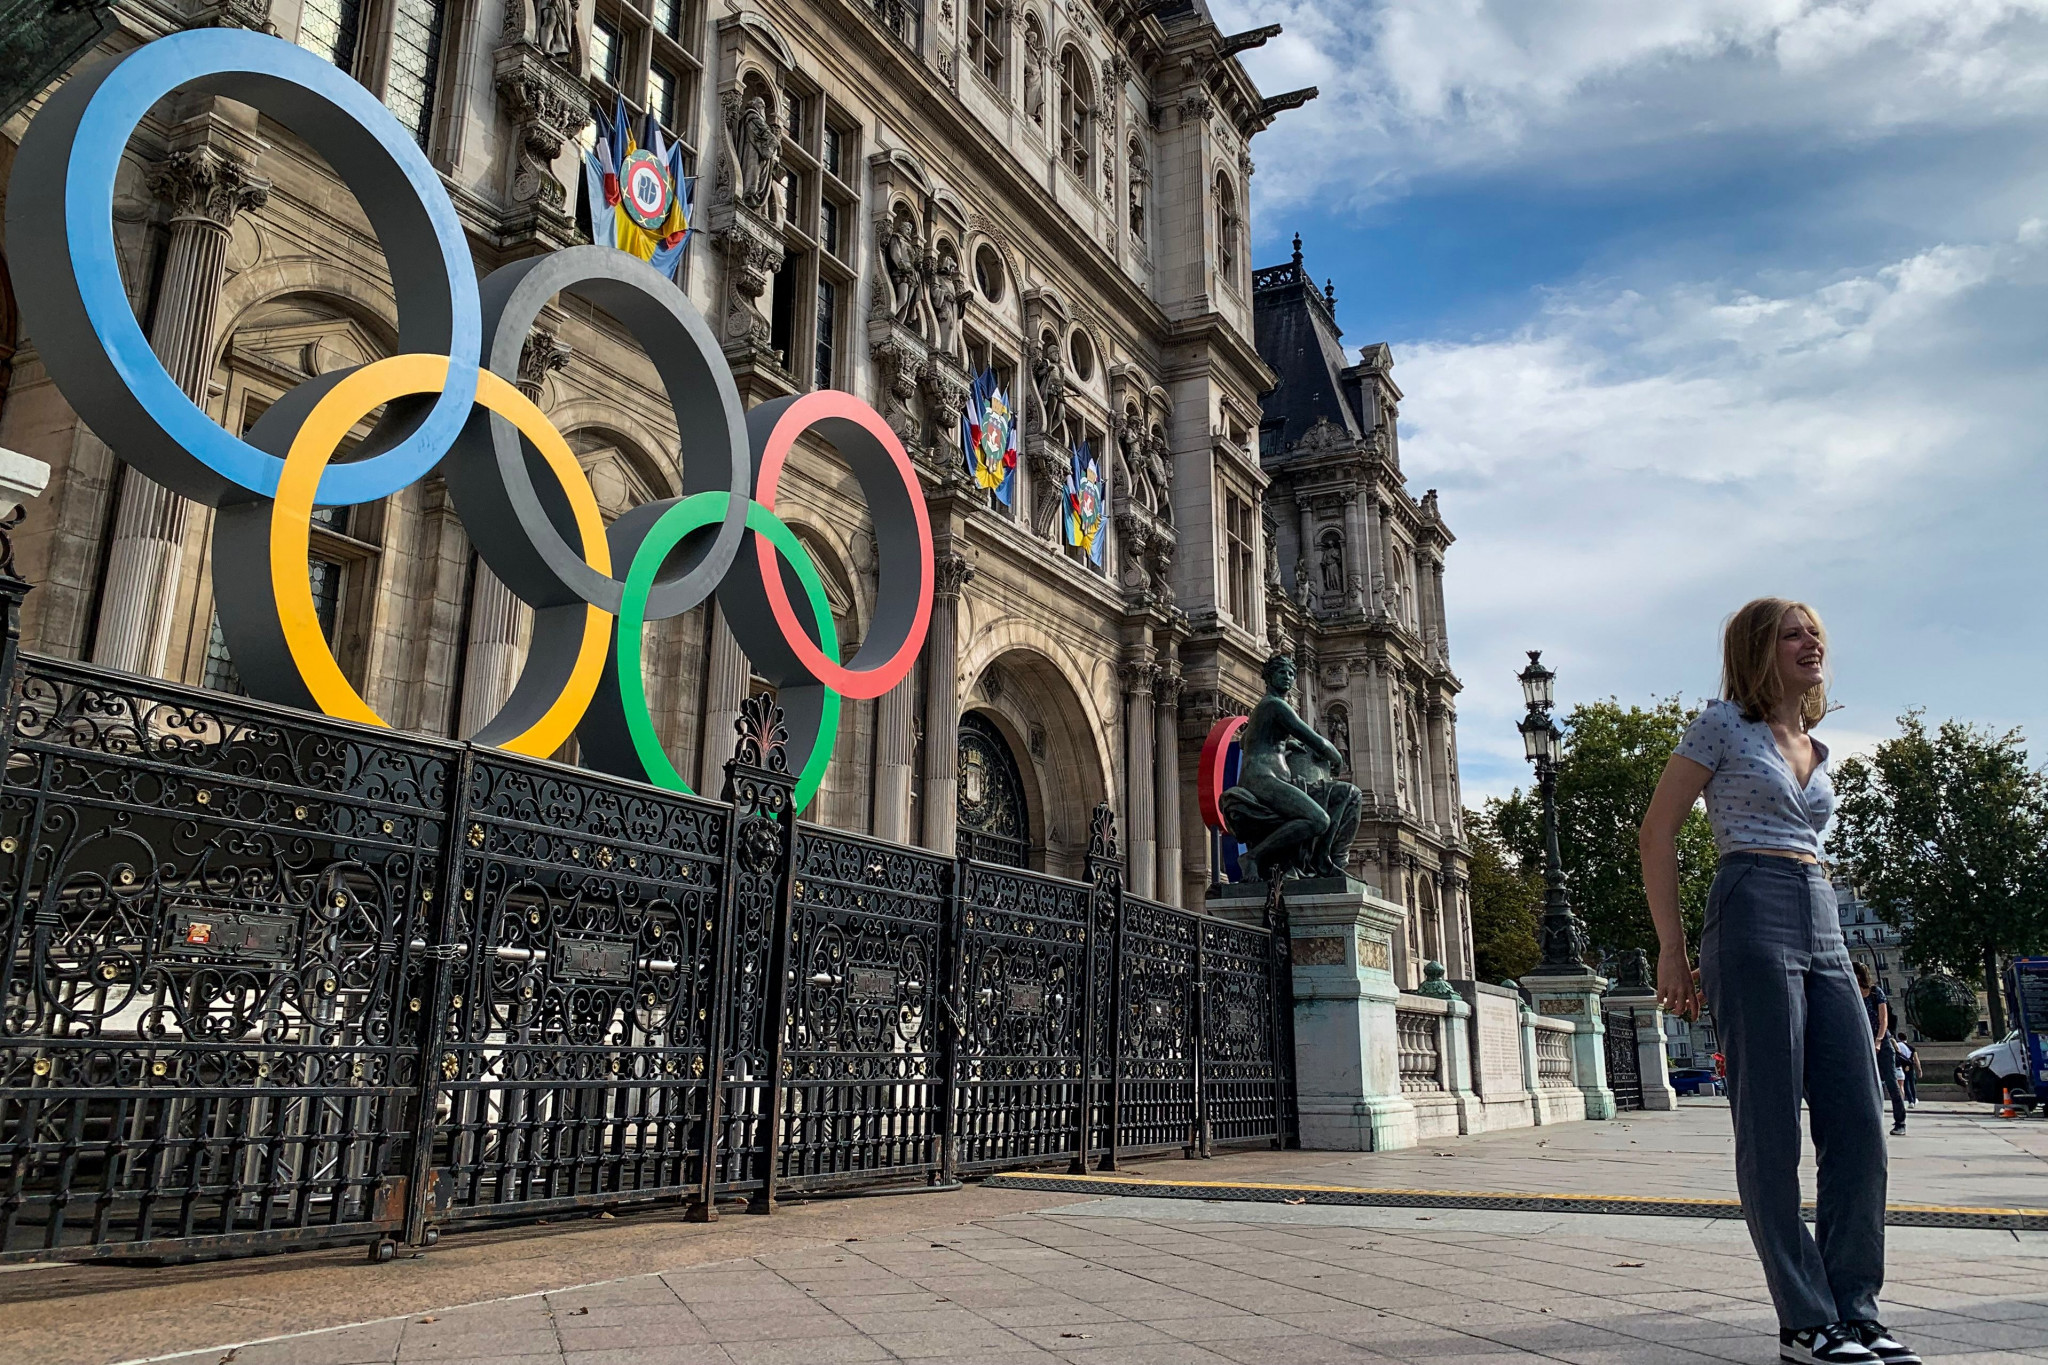 A woman poses in front of the Olympic Rings at the Hotel De Ville in Paris, the city that will host the 2024 Olympic and Paralympic Games. ©Getty Images